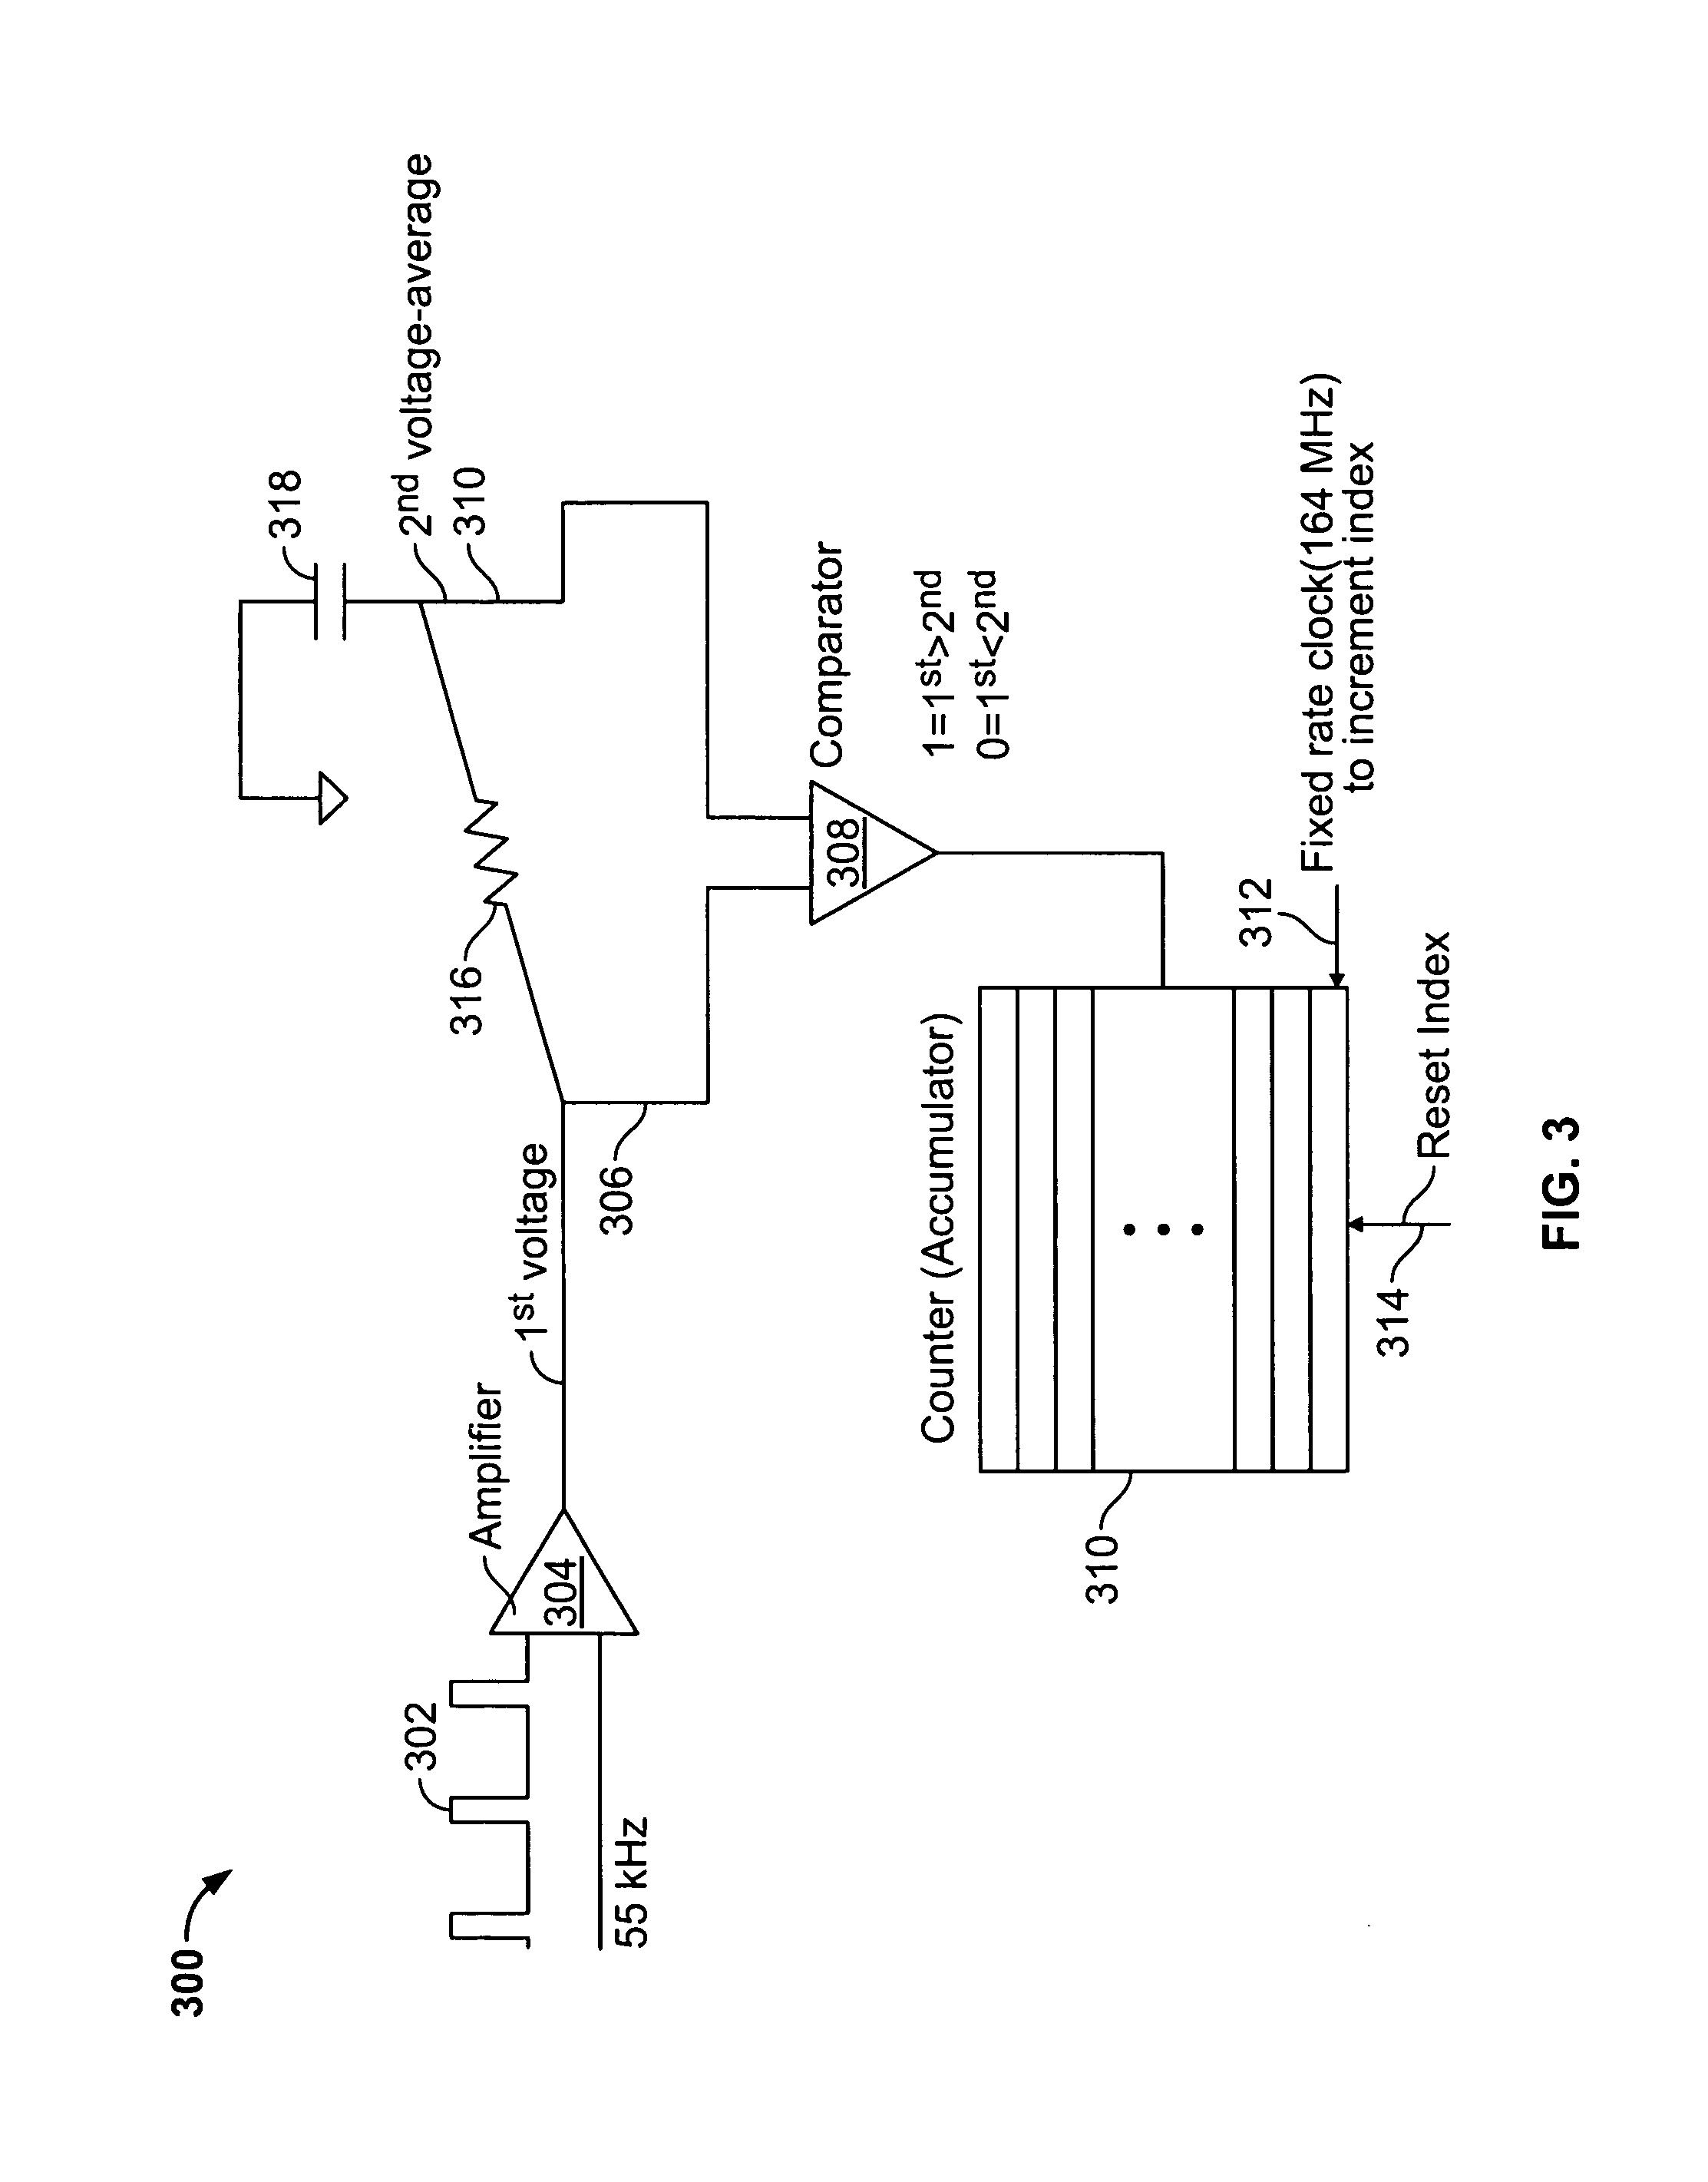 Method for improving the received signal to noise ratio of a laser rangefinder